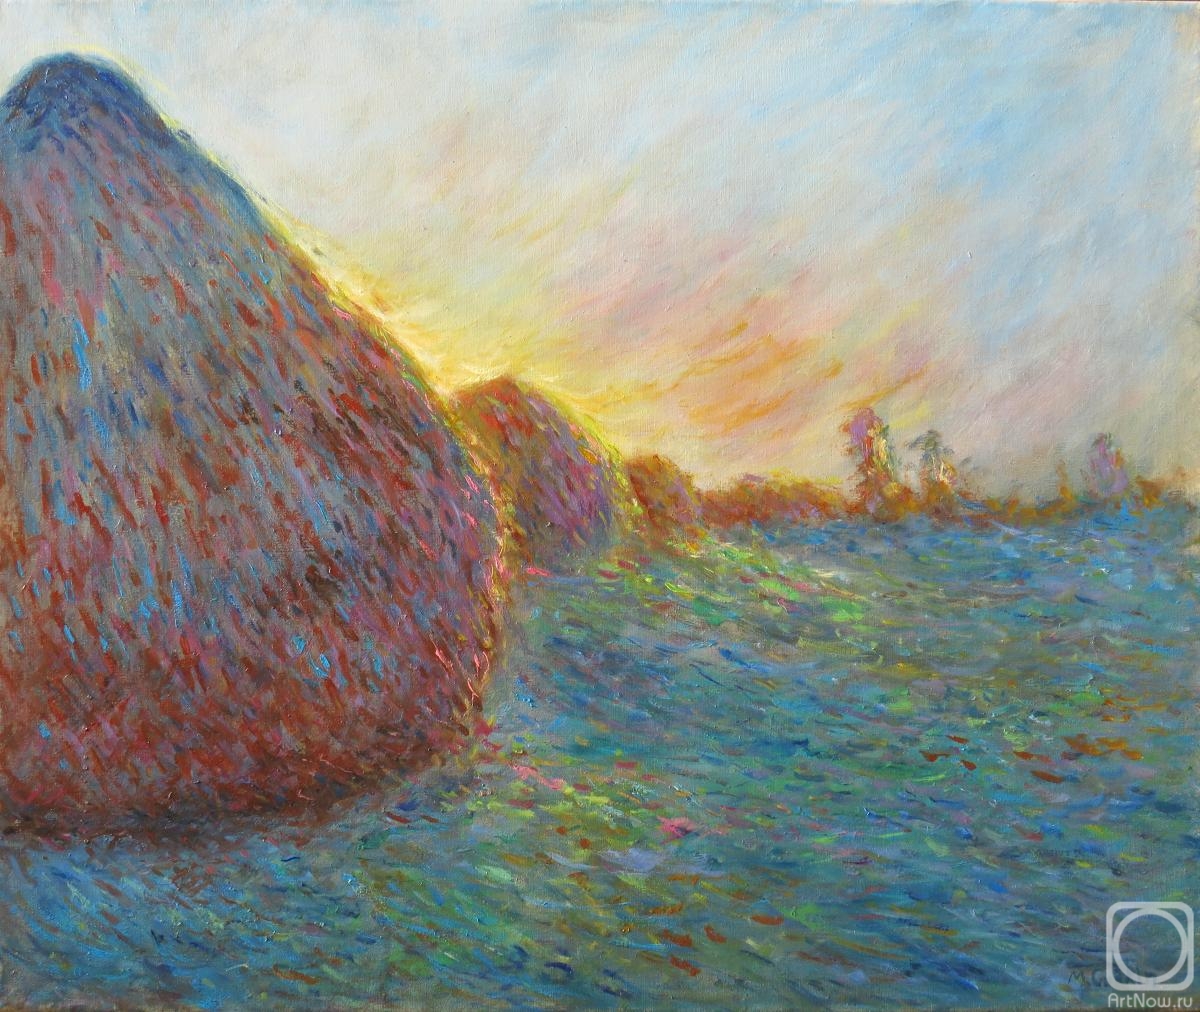 Gubkin Michail. Haystacks. Copy of the painting by C. Monet